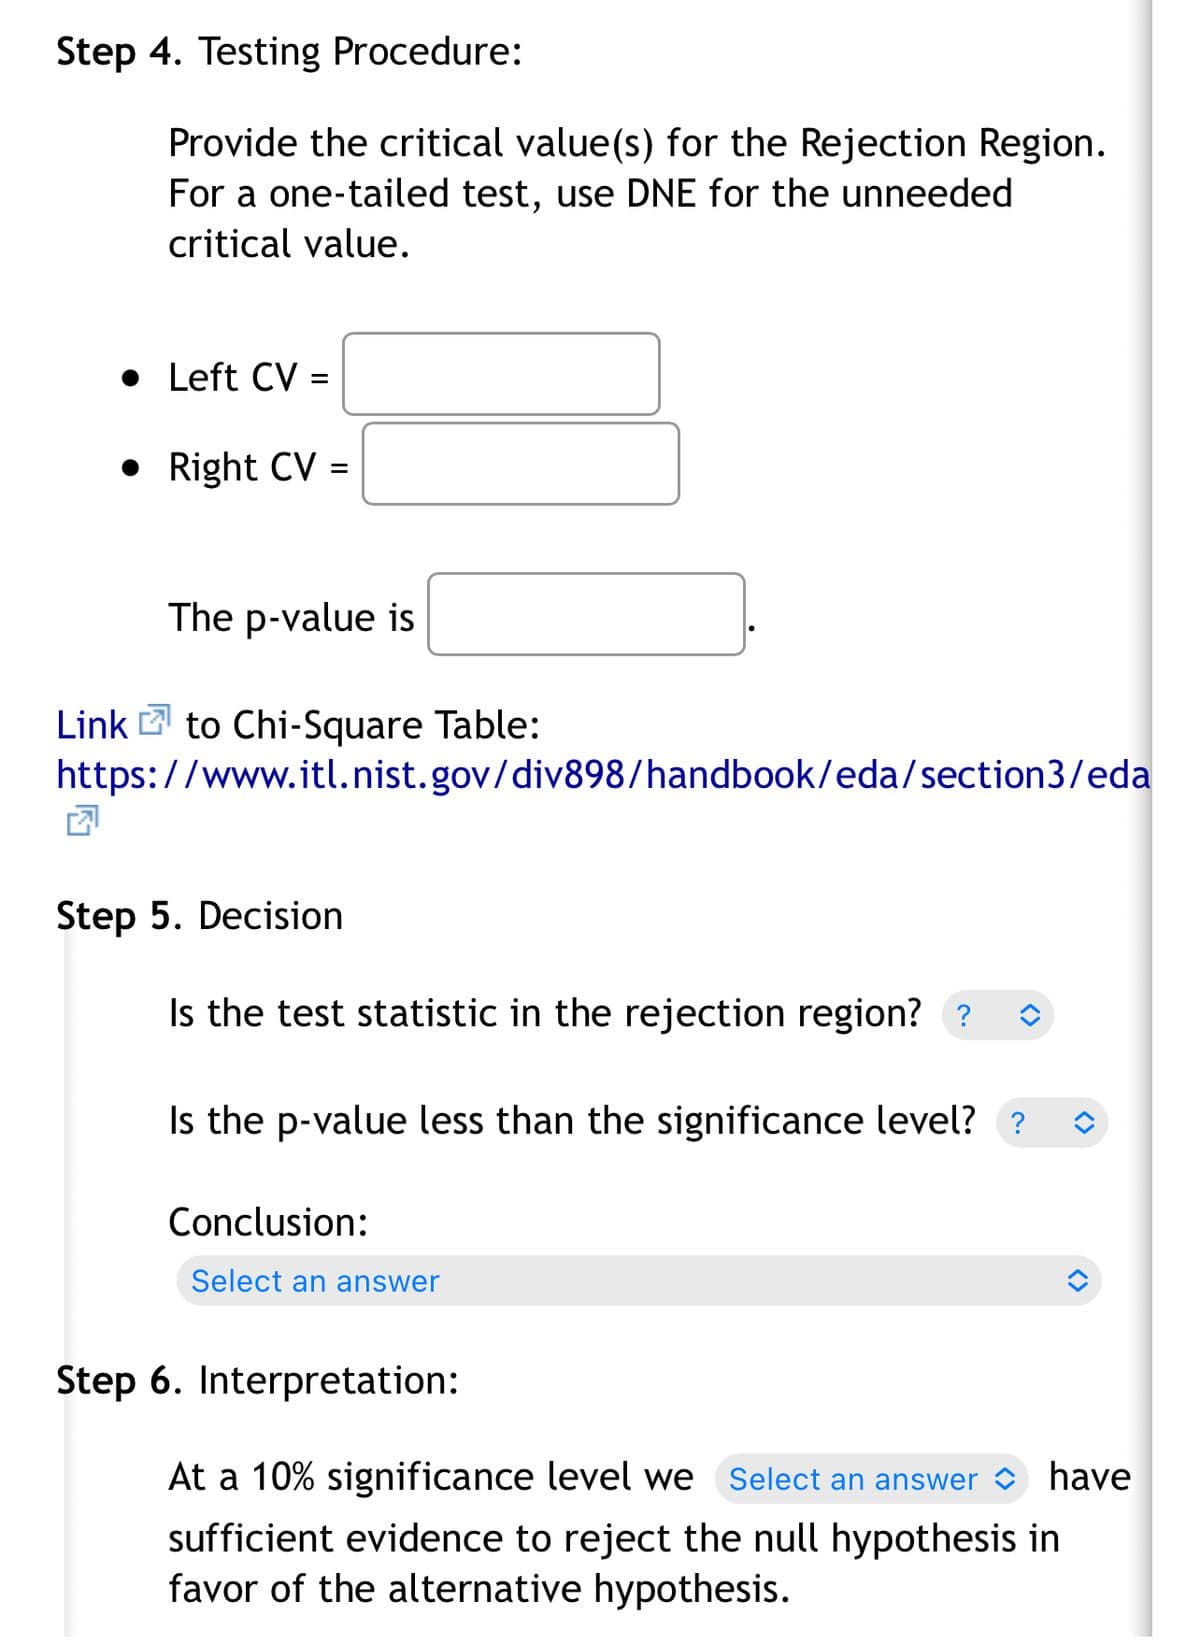 Step 4. Testing Procedure:
Provide the critical value(s) for the Rejection Region.
For a one-tailed test, use DNE for the unneeded
critical value.
• Left CV =
• Right CV =
The p-value is
Link 2 to Chi-Square Table:
https://www.itl.nist.gov/div898/handbook/eda/section3/eda
Step 5. Decision
Is the test statistic in the rejection region? ?
Is the p-value less than the significance level? ?
Conclusion:
Select an answer
Step 6. Interpretation:
At a 10% significance level we Select an answer have
sufficient evidence to reject the null hypothesis in
favor of the alternative hypothesis.
